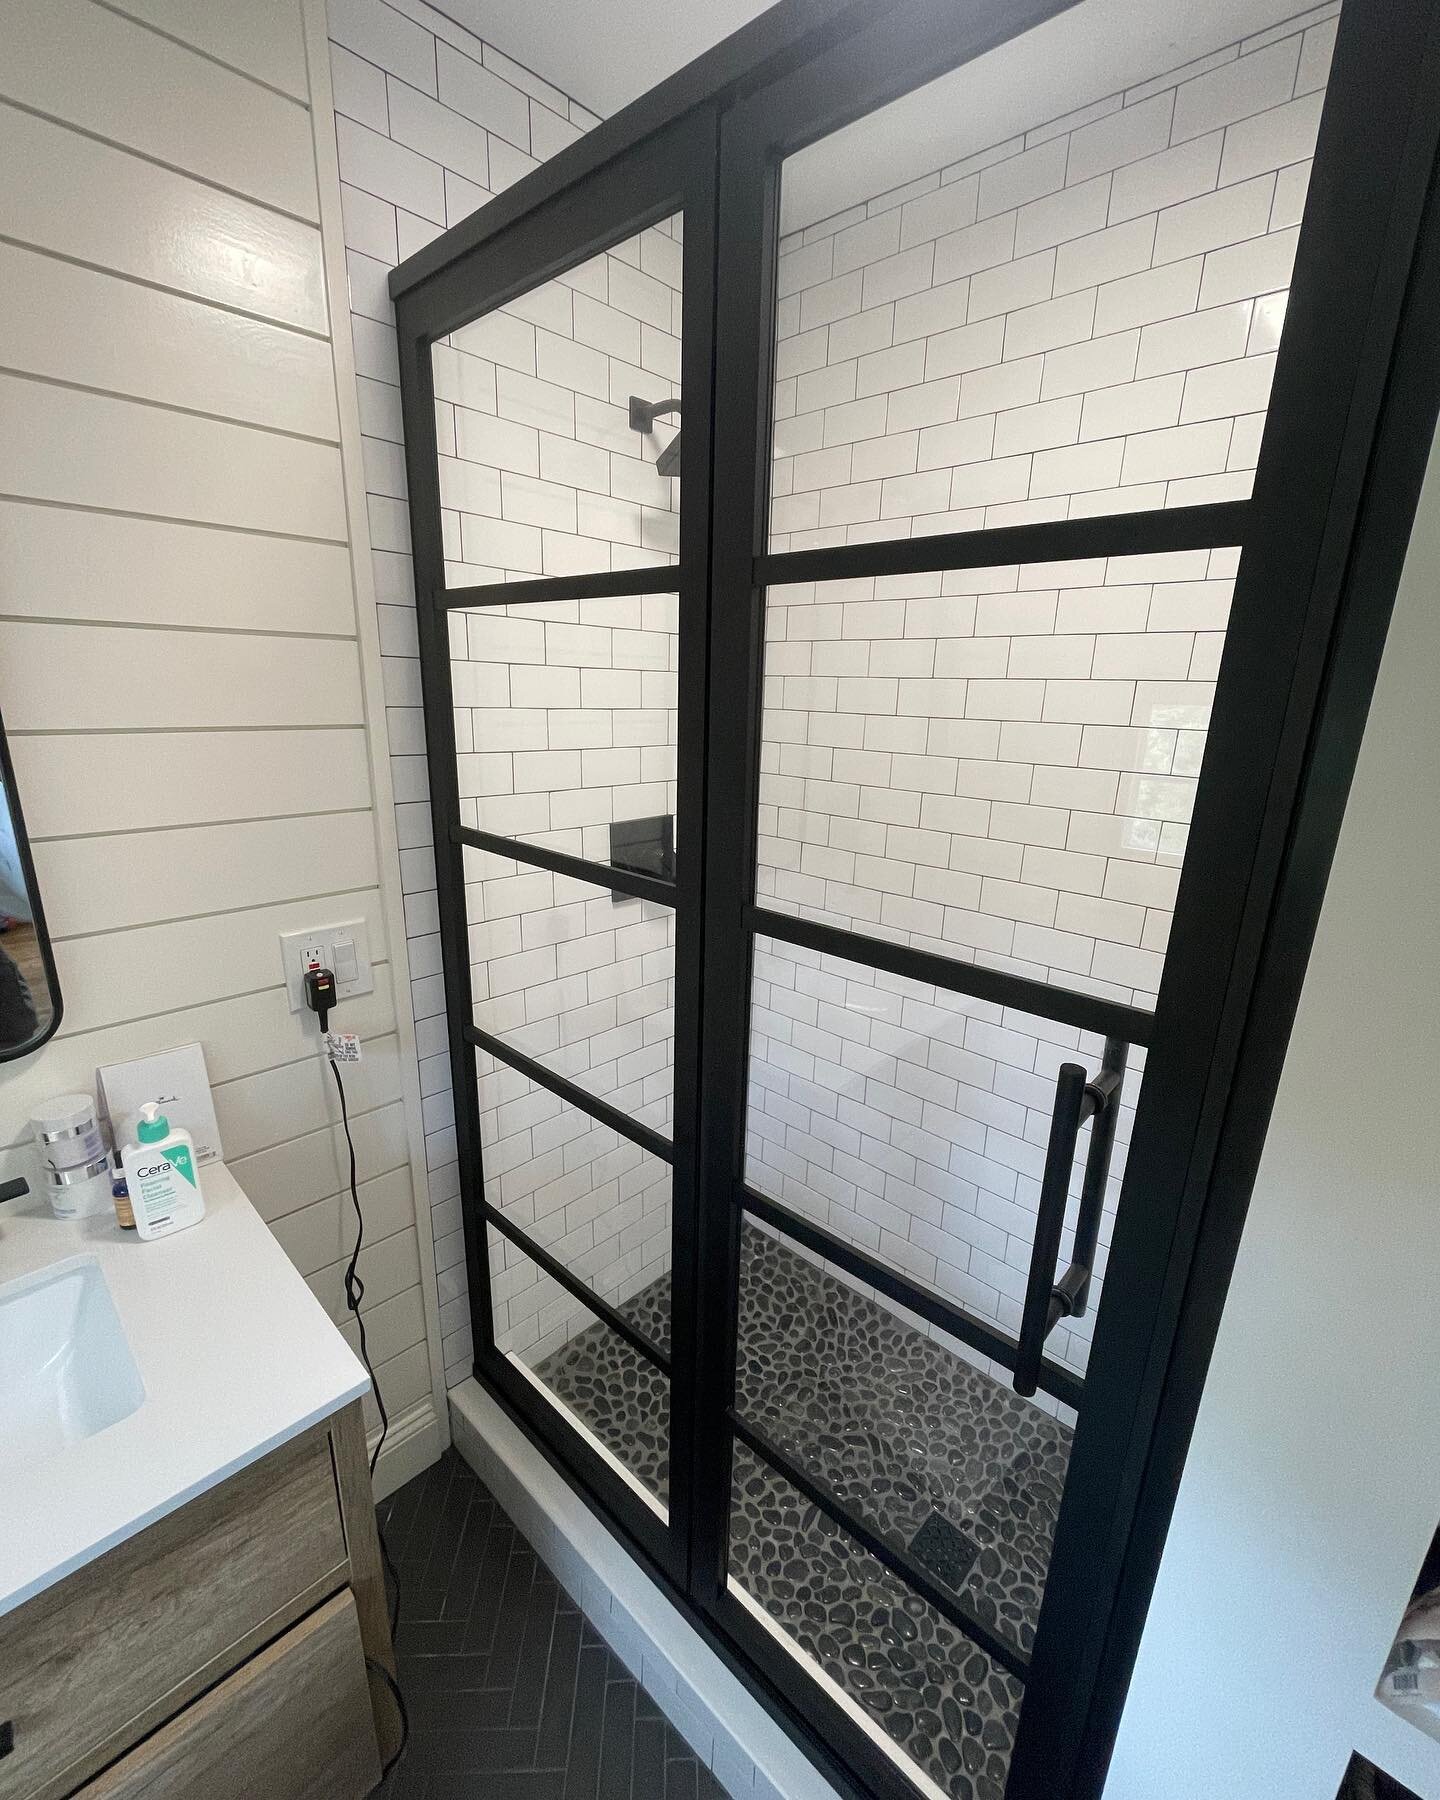 Forgot to post these black metal framed doors we had made for this custom sized shower a few months back. They are well built shower doors and a bold choice that makes the whole bathroom look amazing.